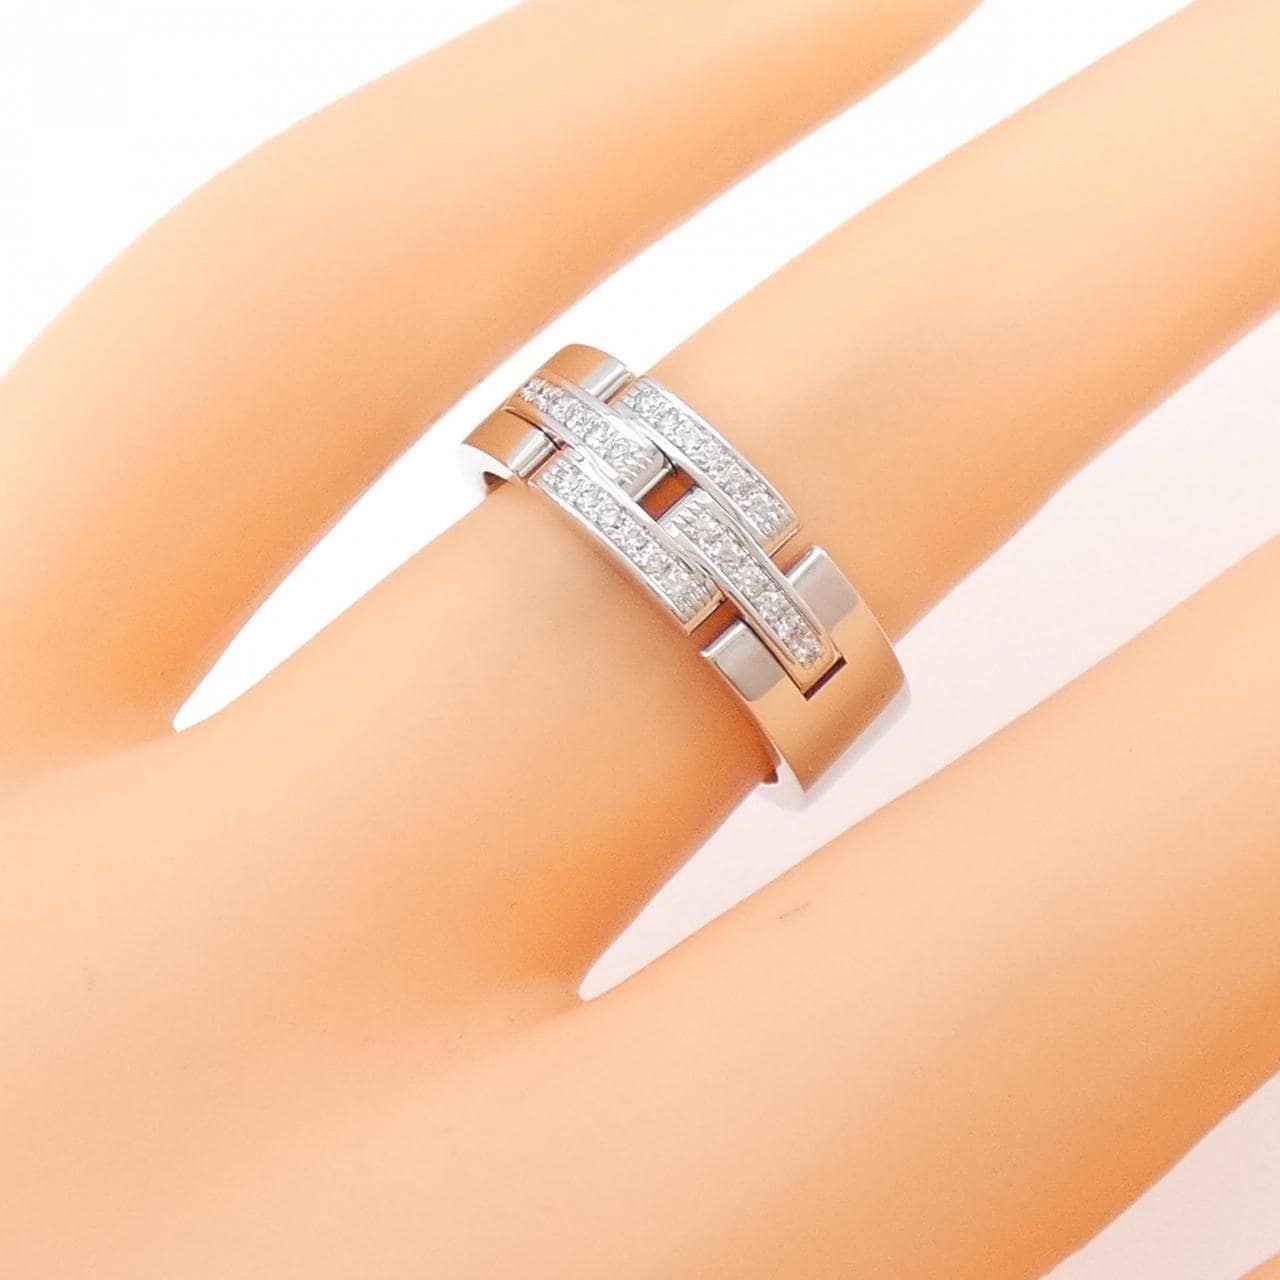 Cartier maillon panthère small ring